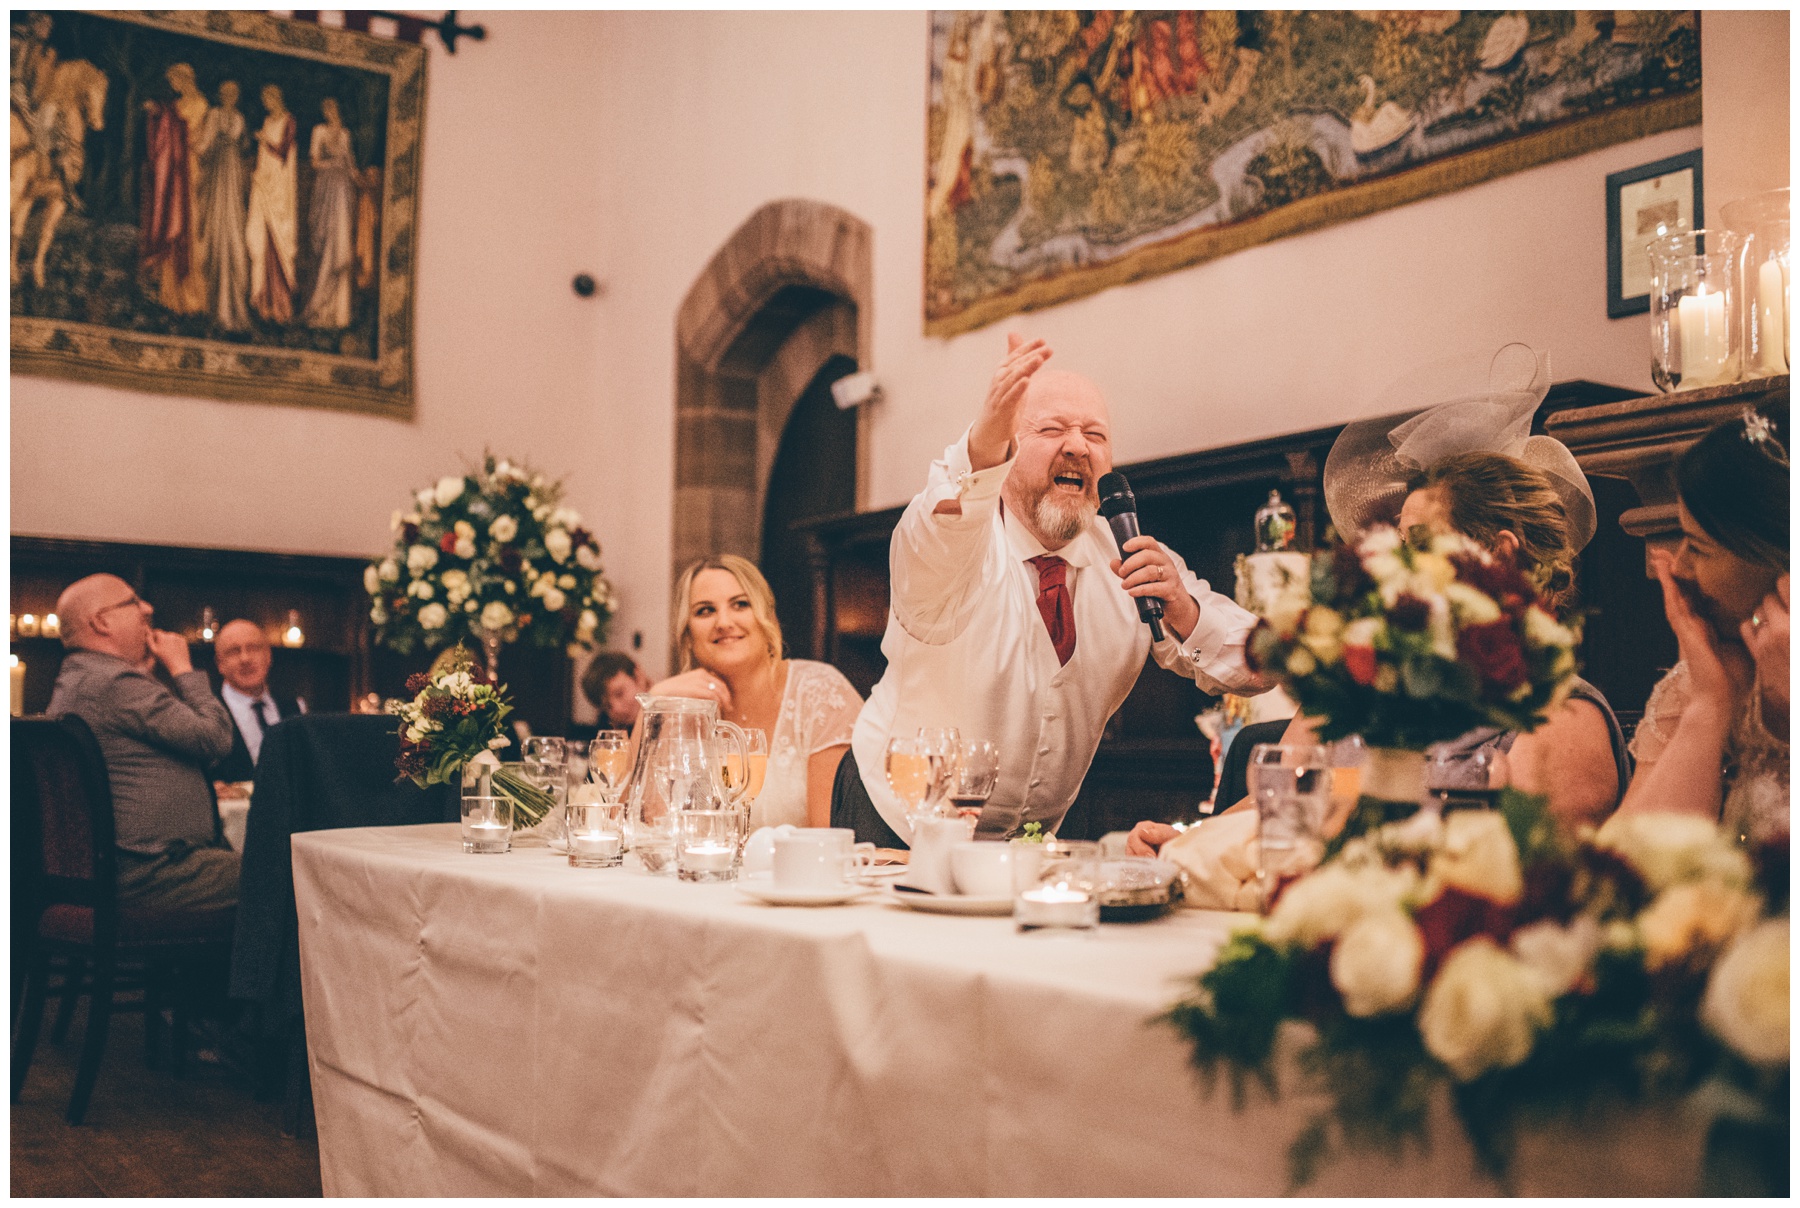 The bride's Dad makes a joke about the bride during his speech at Peckforton Castle in Cheshire.